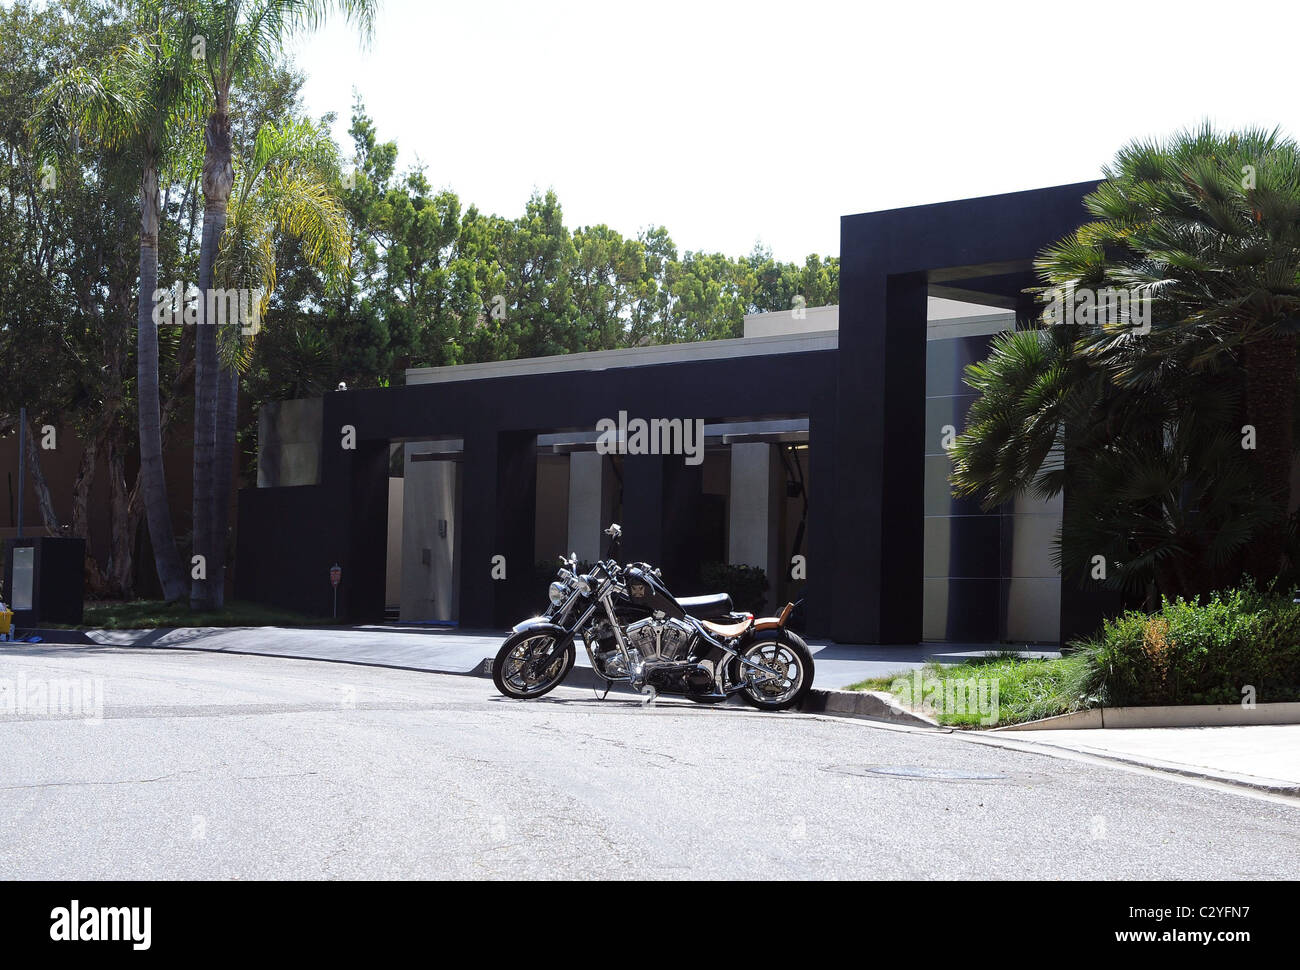 Keanu Reeves' home and motorcycle Los Angeles, California - 27.08.08 Stockfoto ...1300 x 971